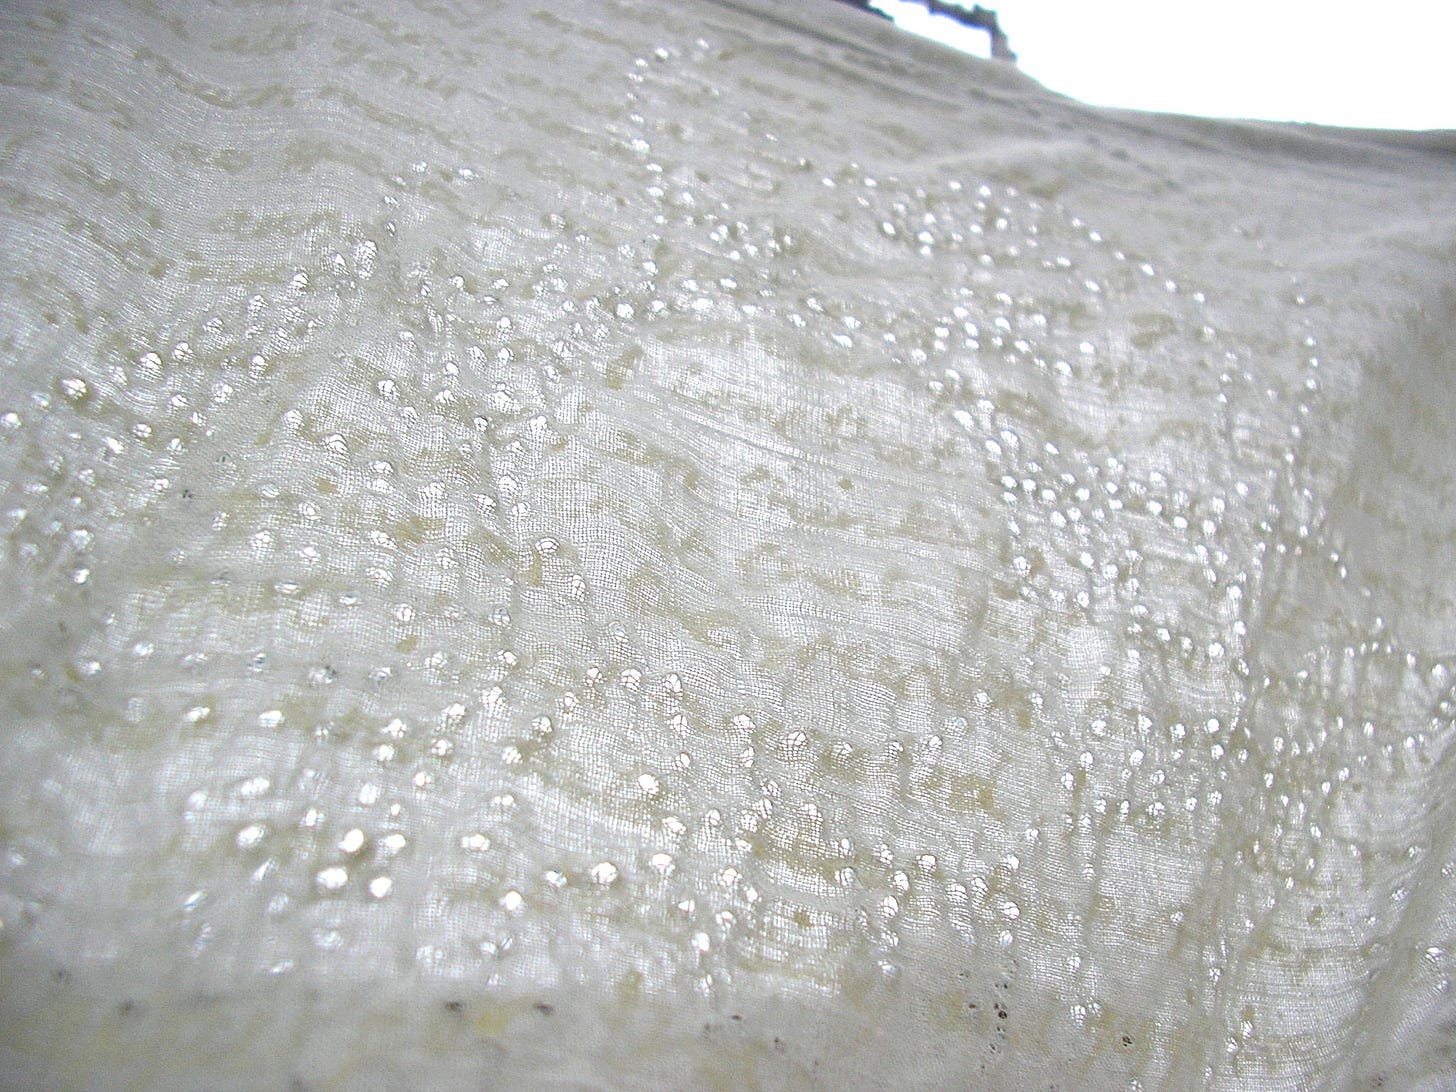 close up of some cream fabric which has pierced holes in it that form an indeterminate image. You can also see faint writing of the fabric which had a ghostly quality.